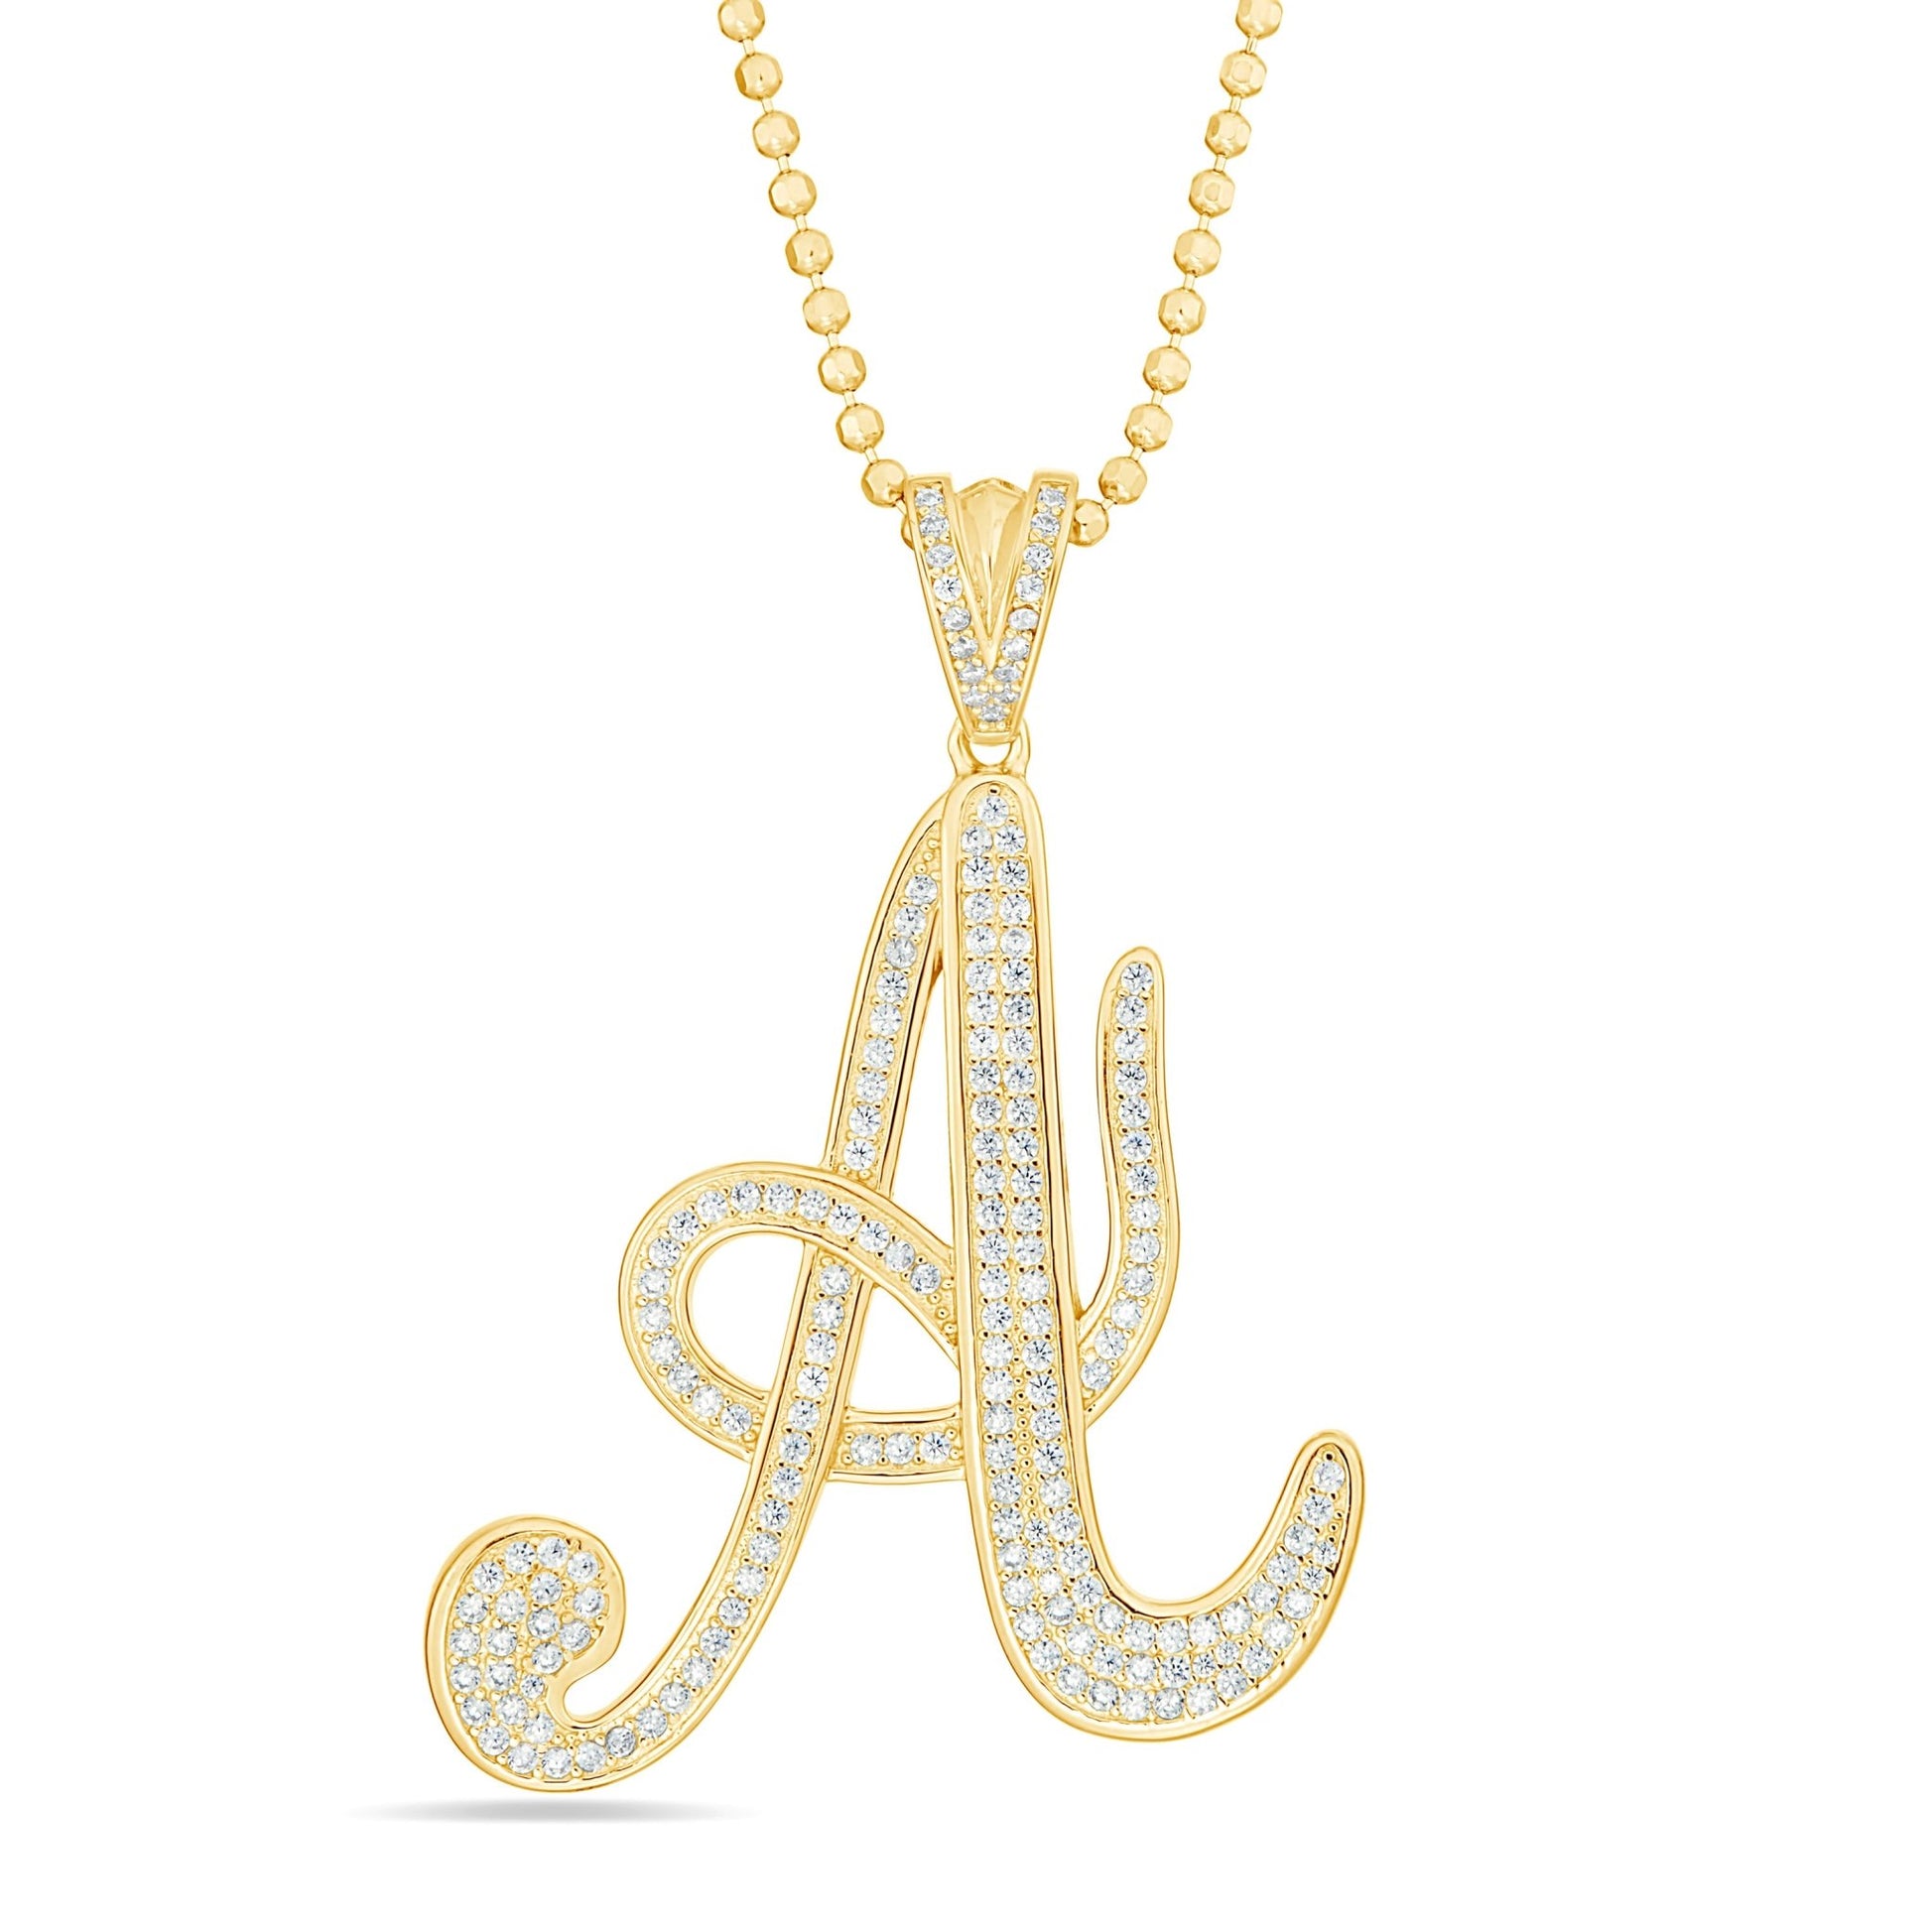 Letter a pendant necklace in silver